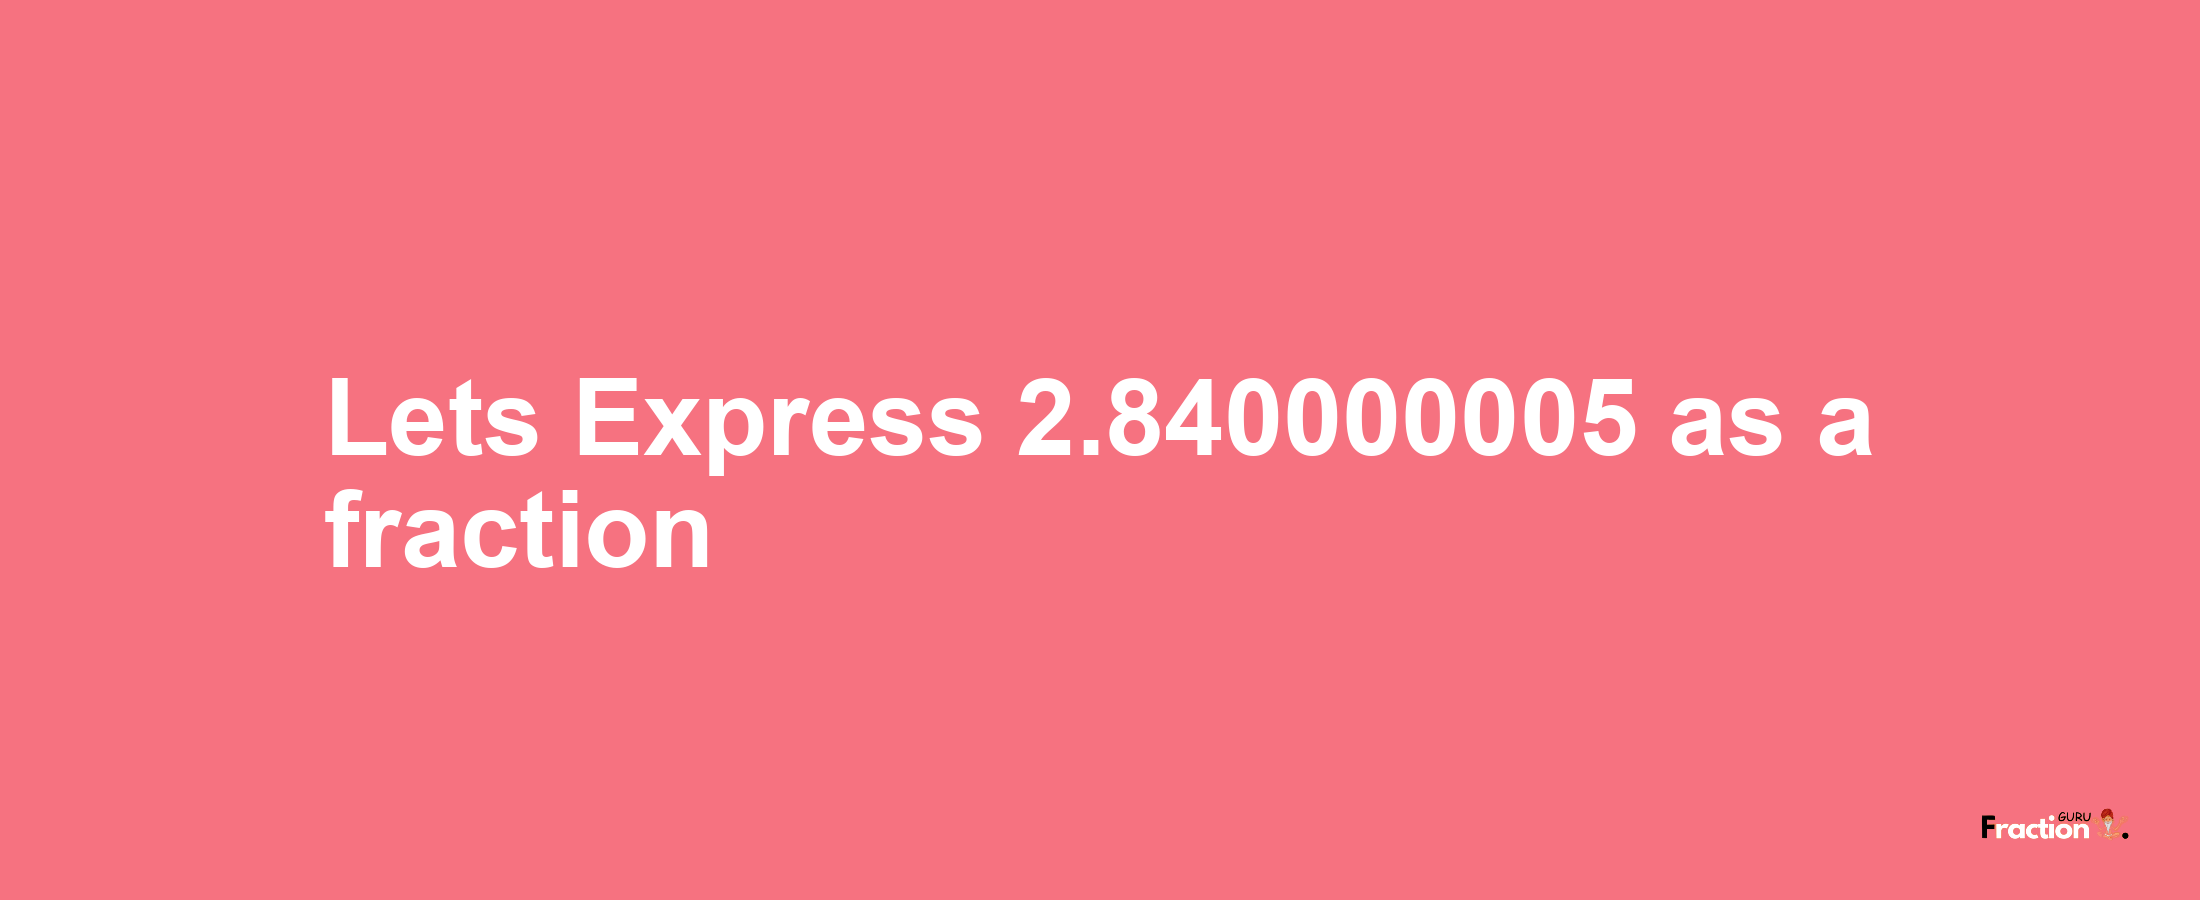 Lets Express 2.840000005 as afraction